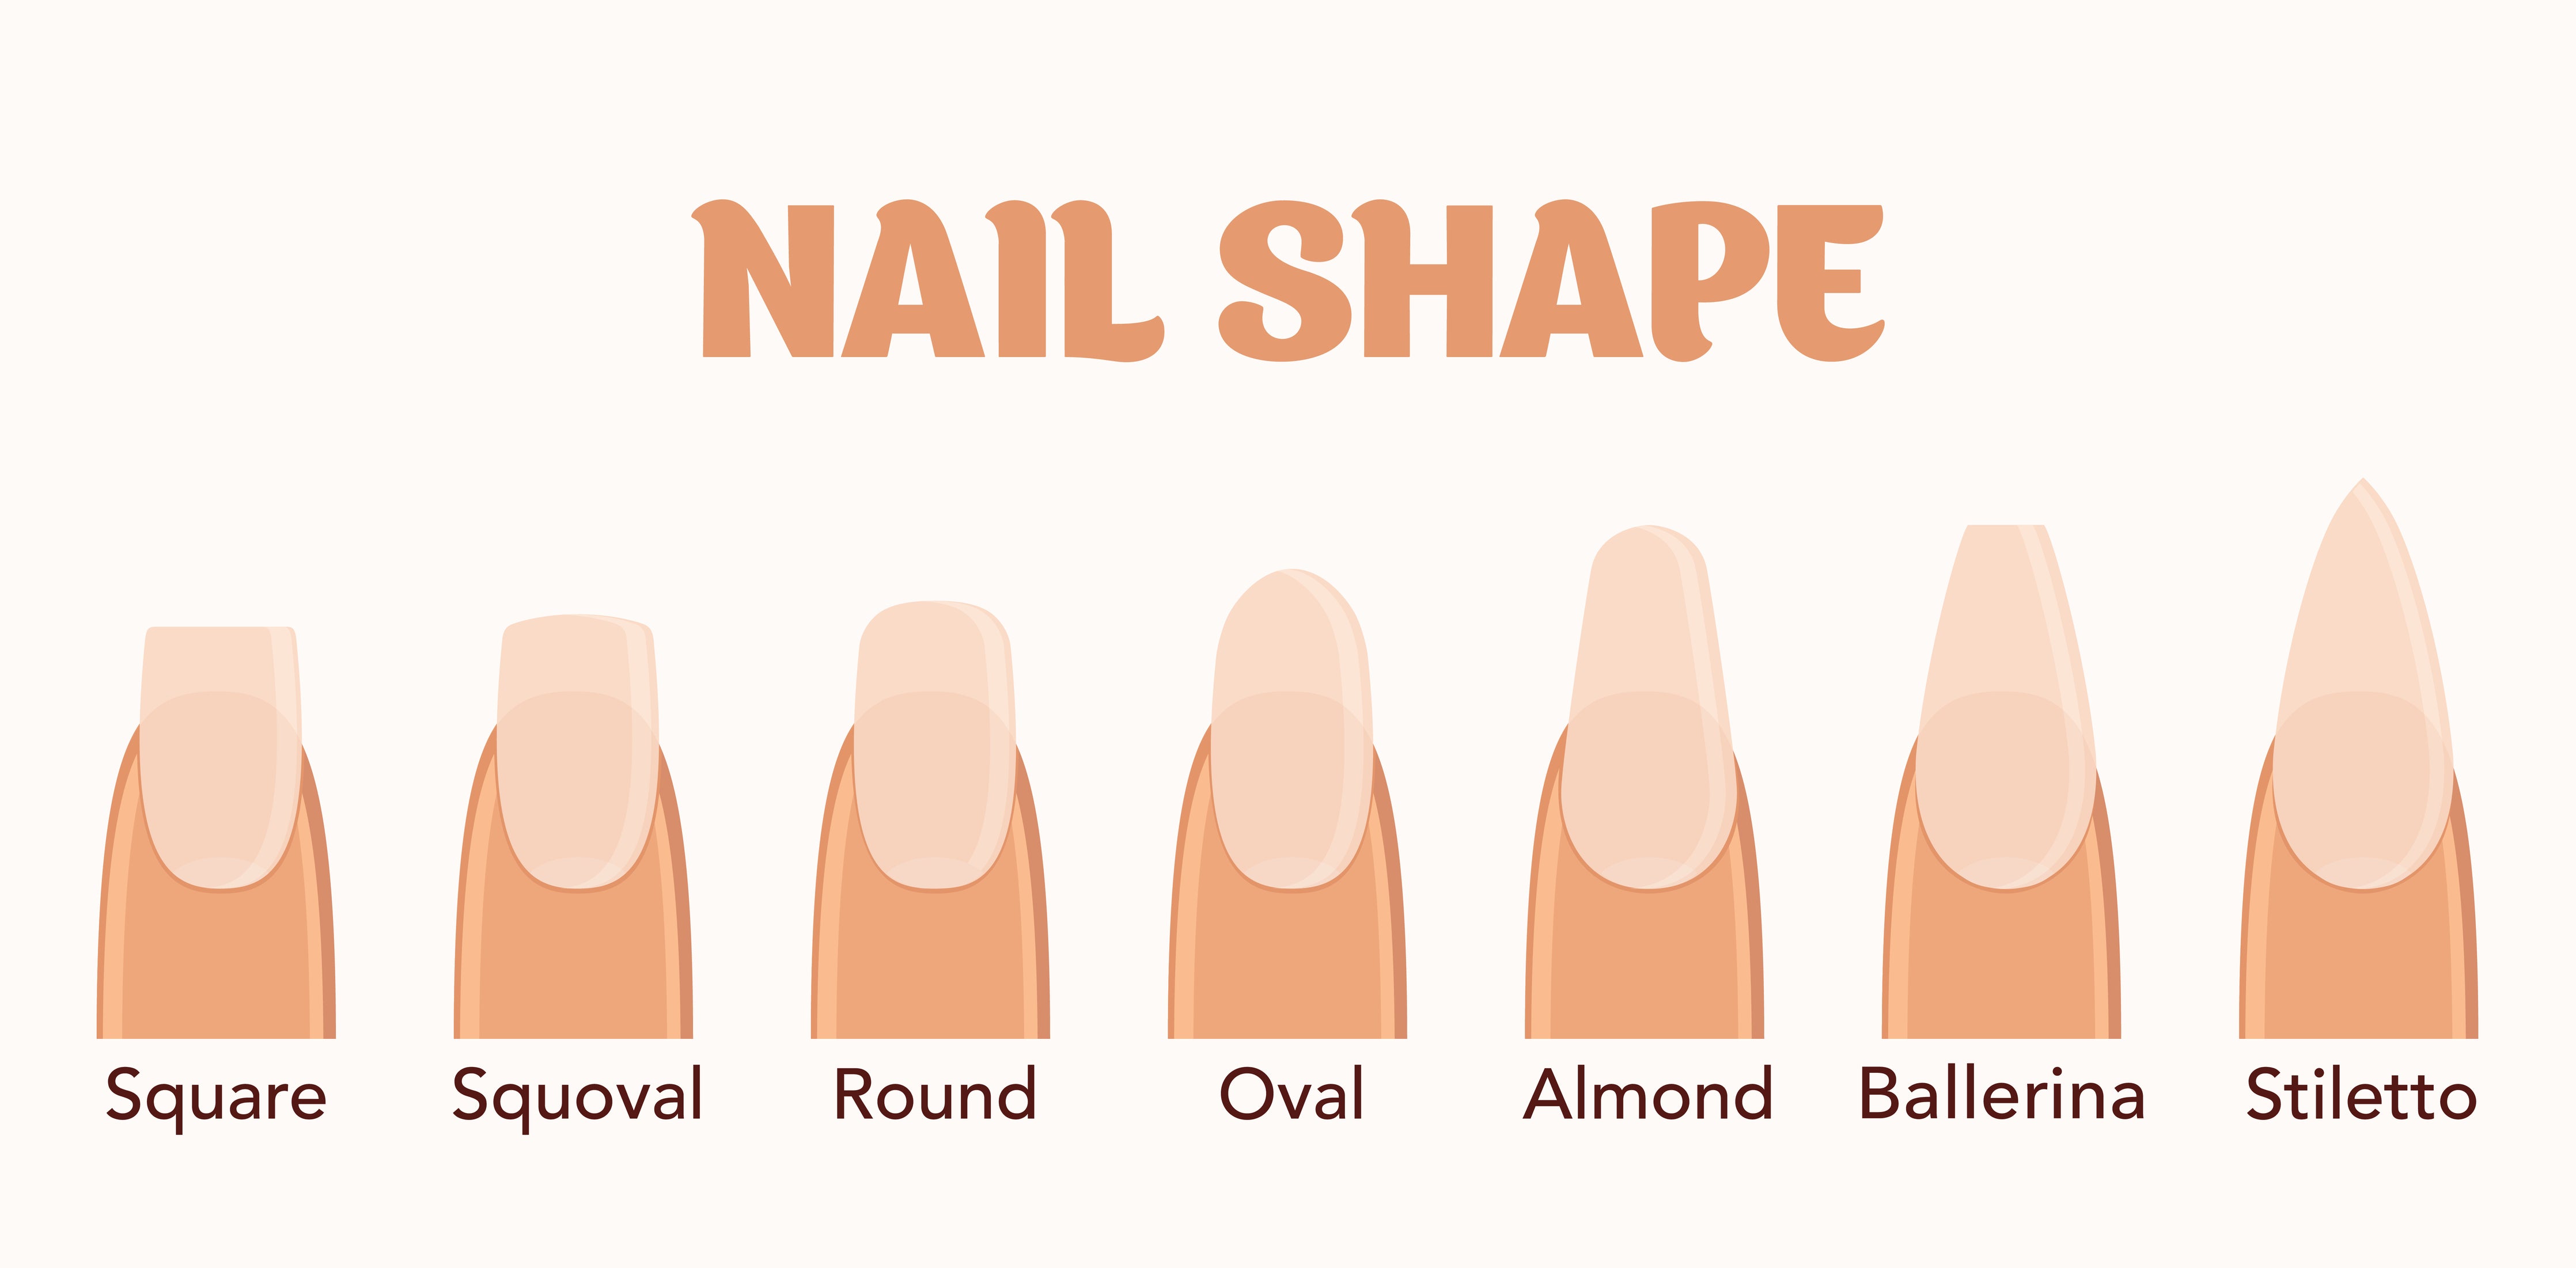 7. "Nail Shape and Color Guide: Find Your Perfect Match" - wide 4